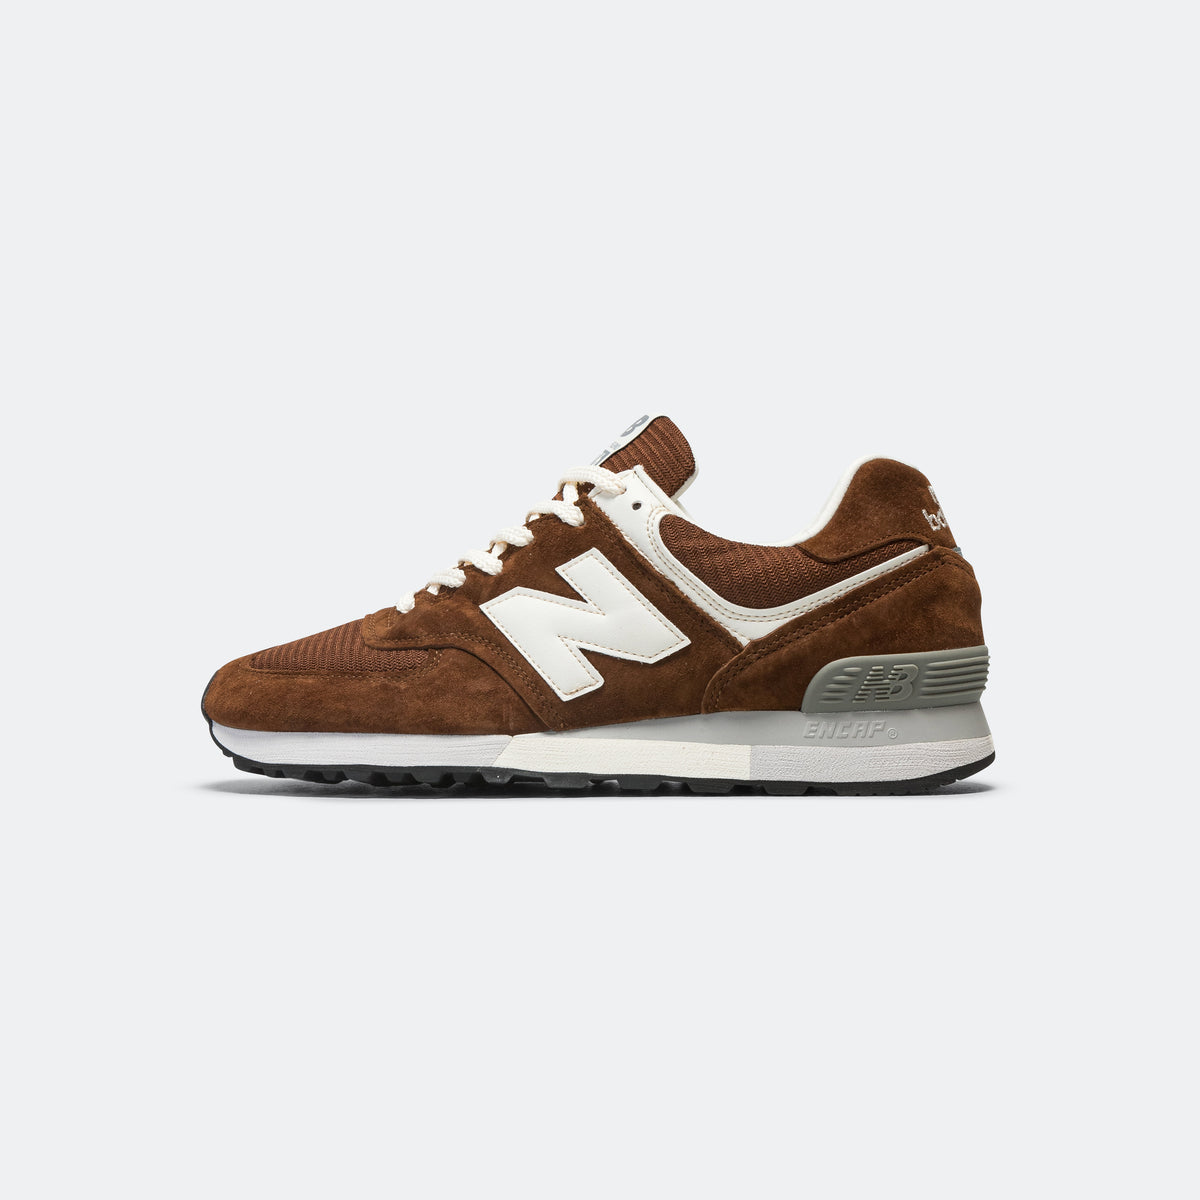 New Balance 576 Monk's Robe/Coconut Milk - OU576BRN | Up There | UP THERE